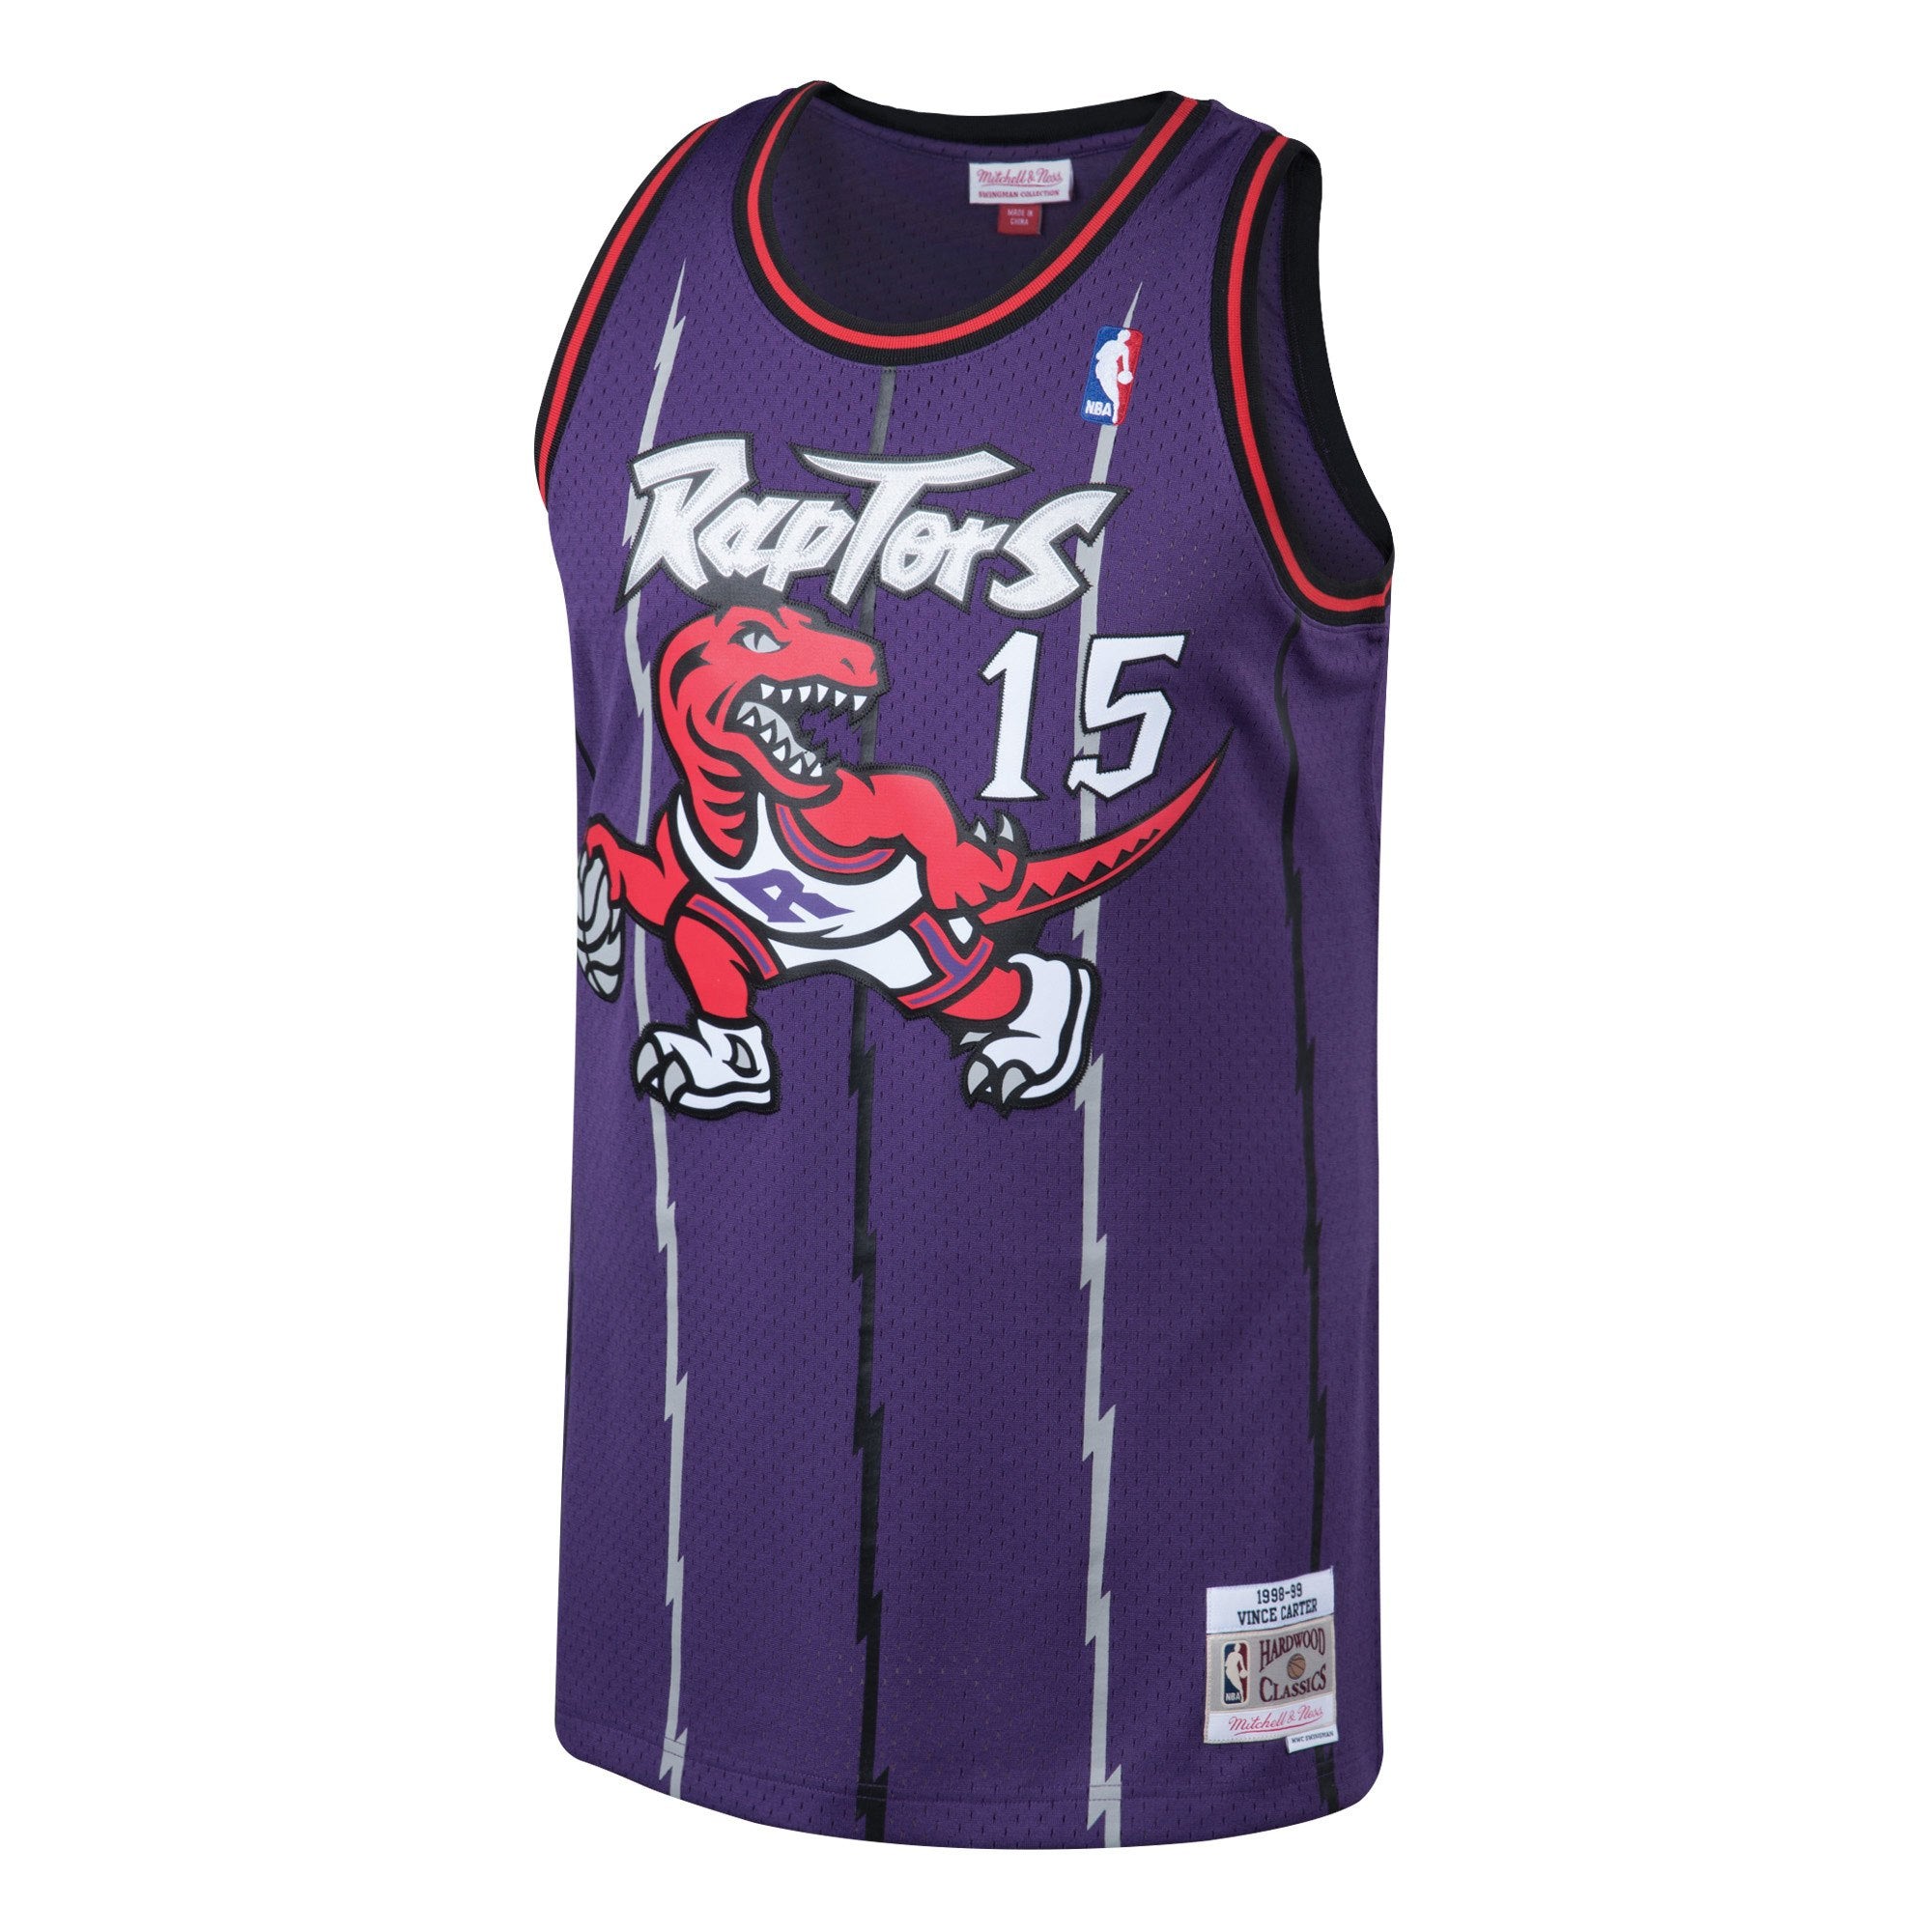 Ideas for the Toronto Raptors two remaining jerseys